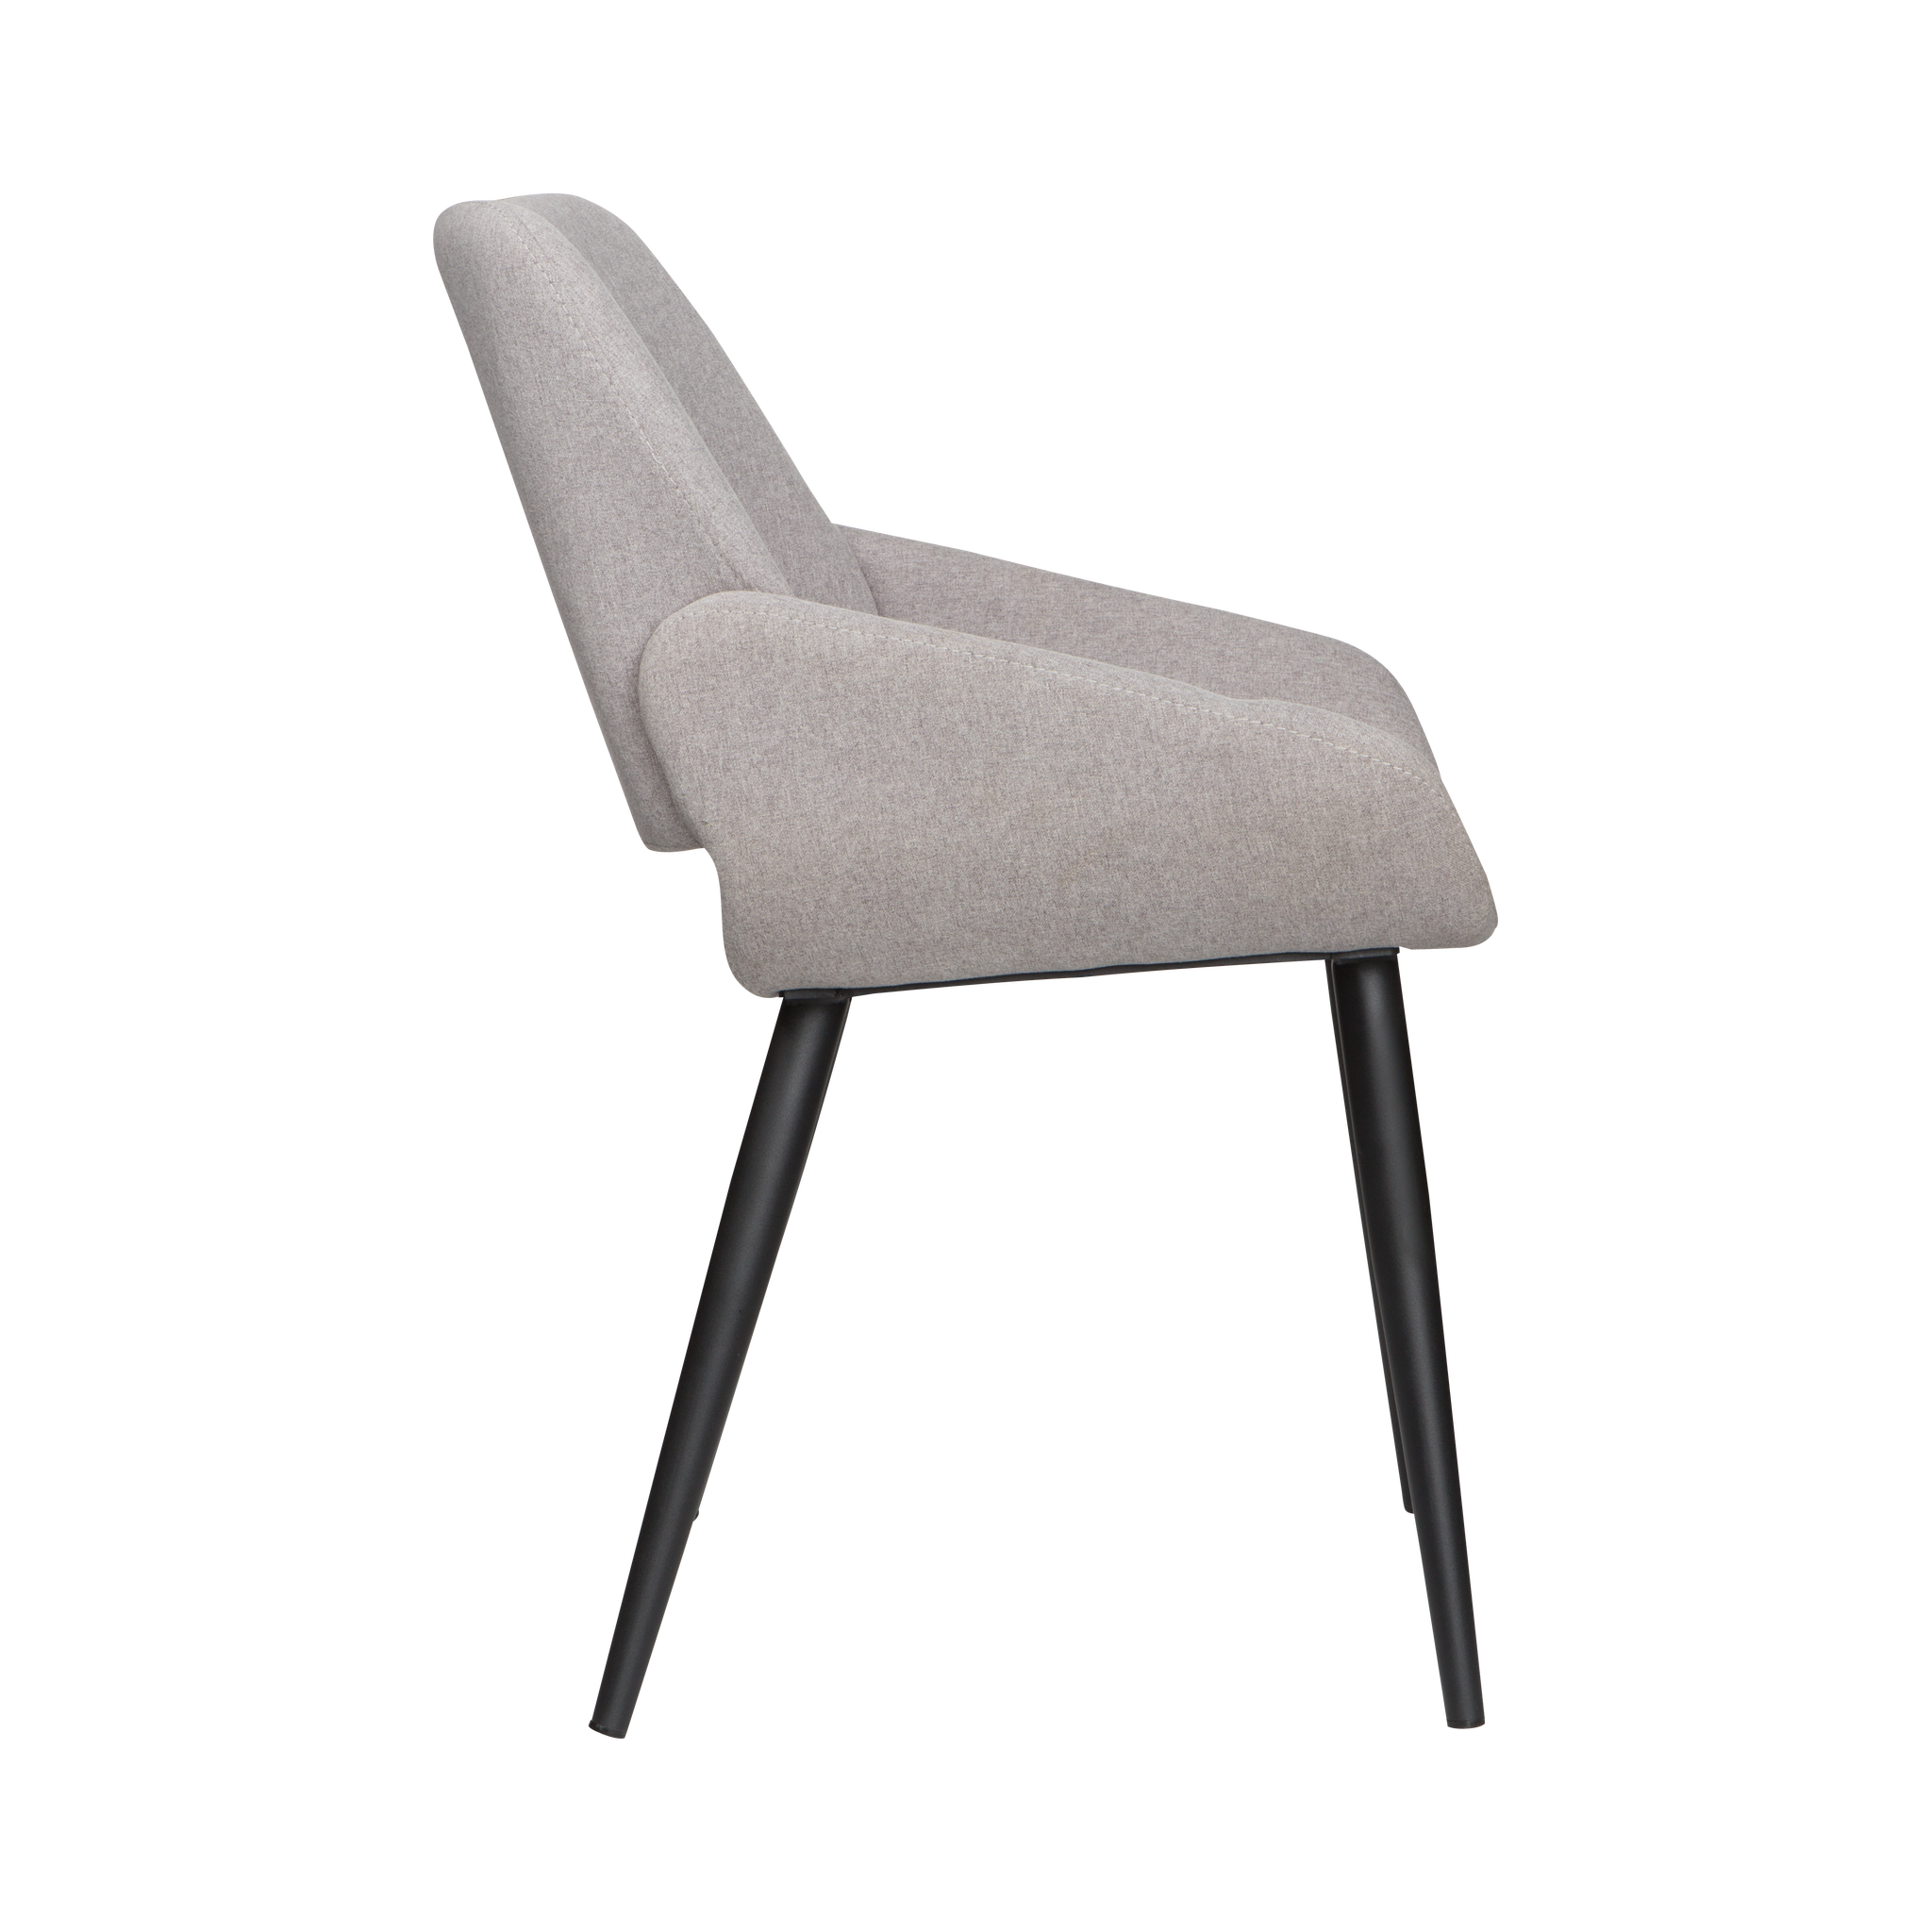 76810 MANFRED Chair